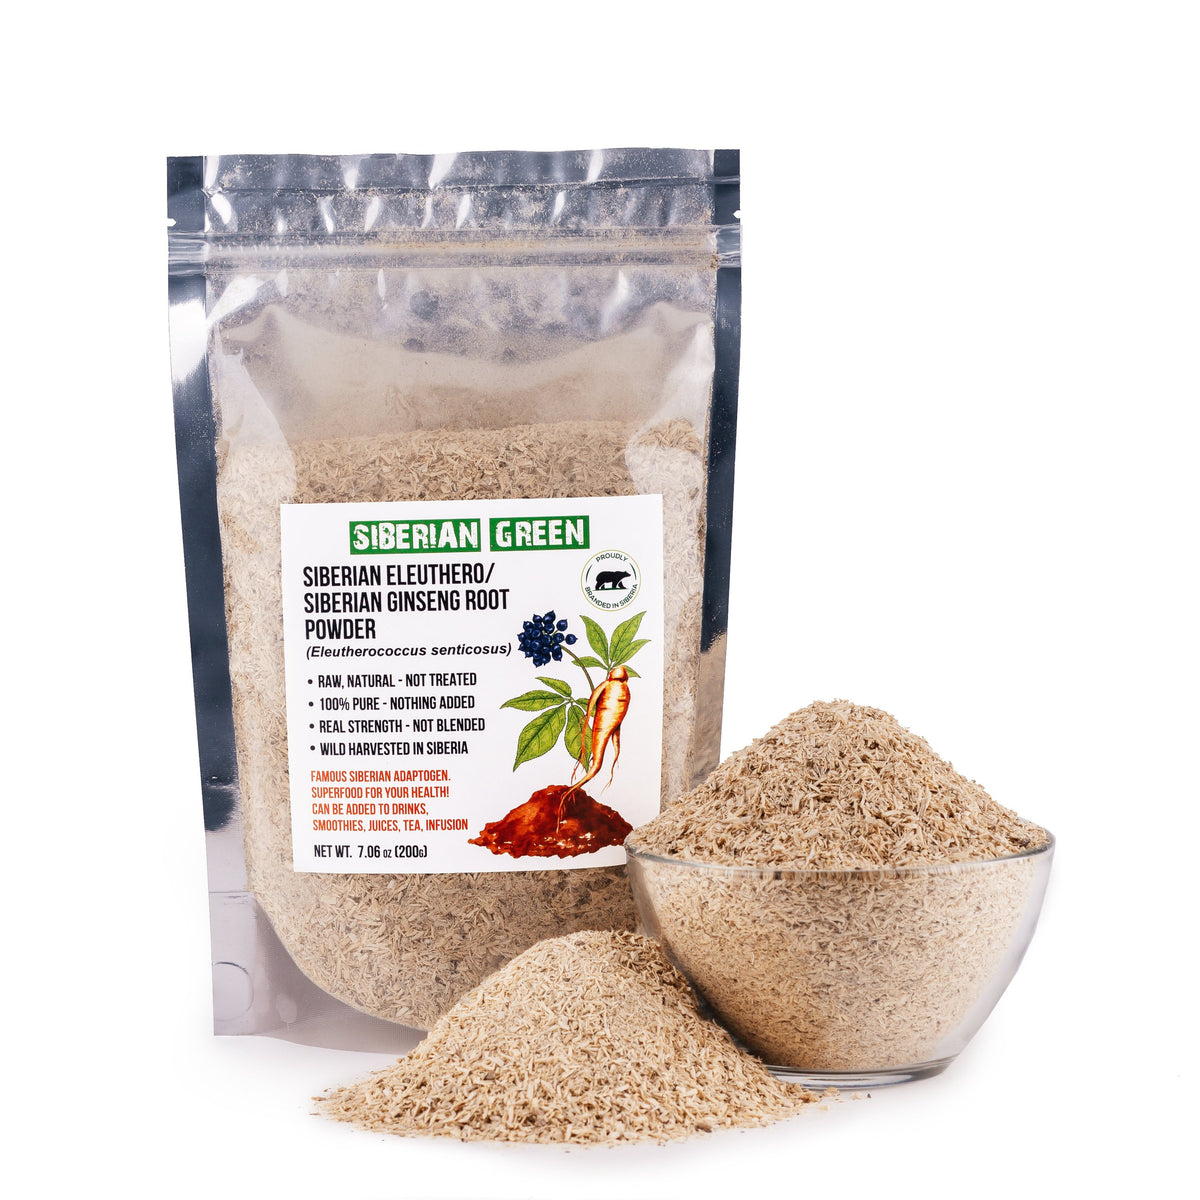 Siberian Ginseng Dried Root Powder 200g (7.06 oz) Eleutherococcus Senticosus Siberian Eleuthero Cut Sifted 100% Pure Natural